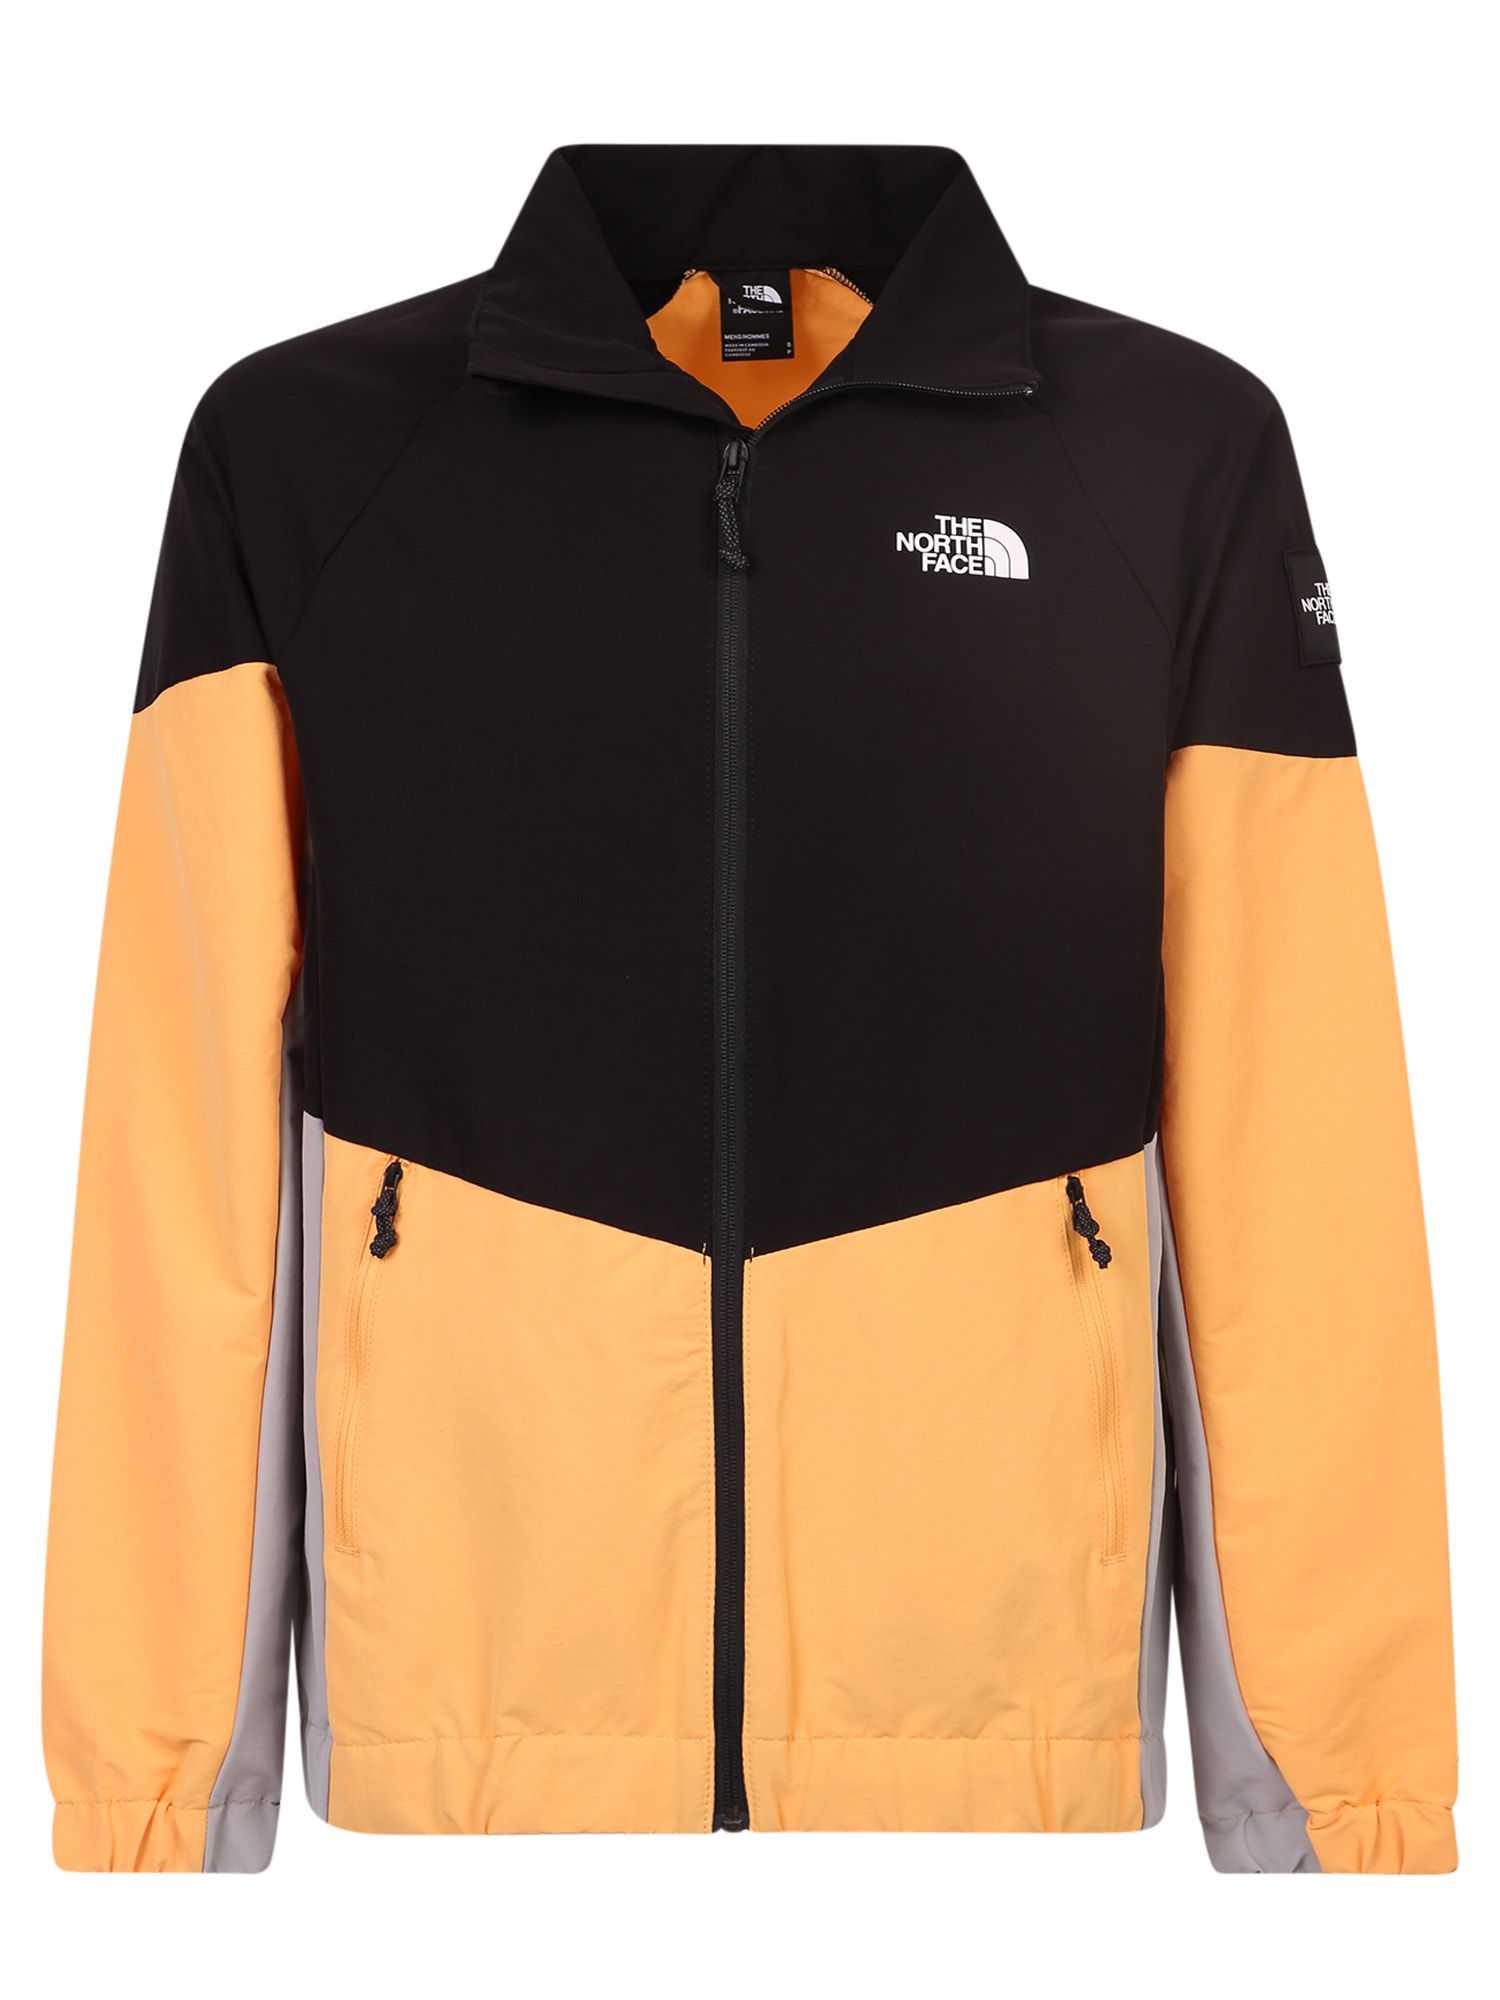 The North Face Phlego Zip-up Jacket